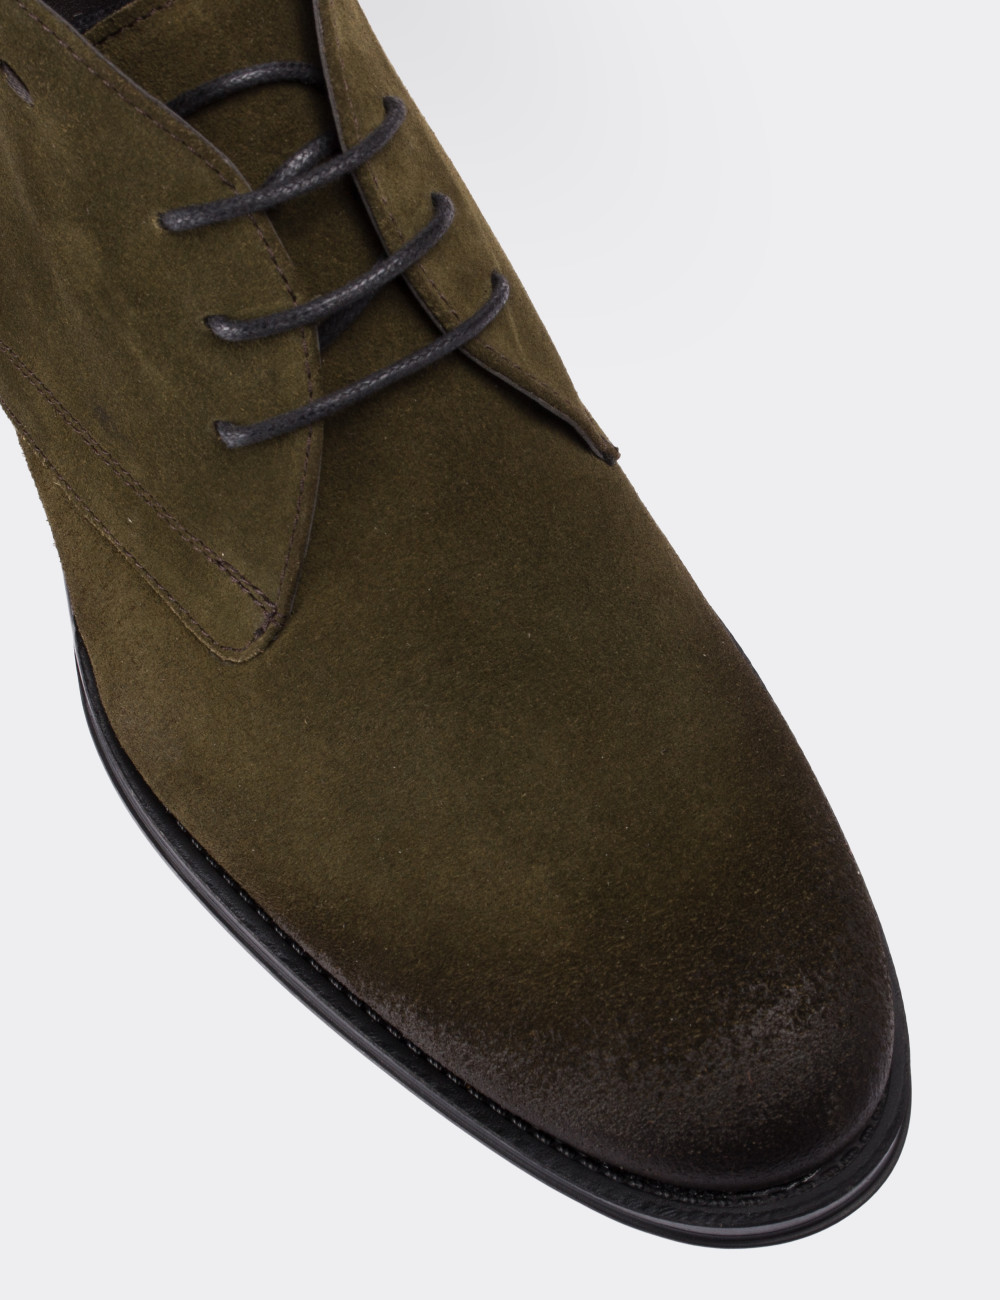 Green Suede Leather Desert Boots - 01295MYSLC01